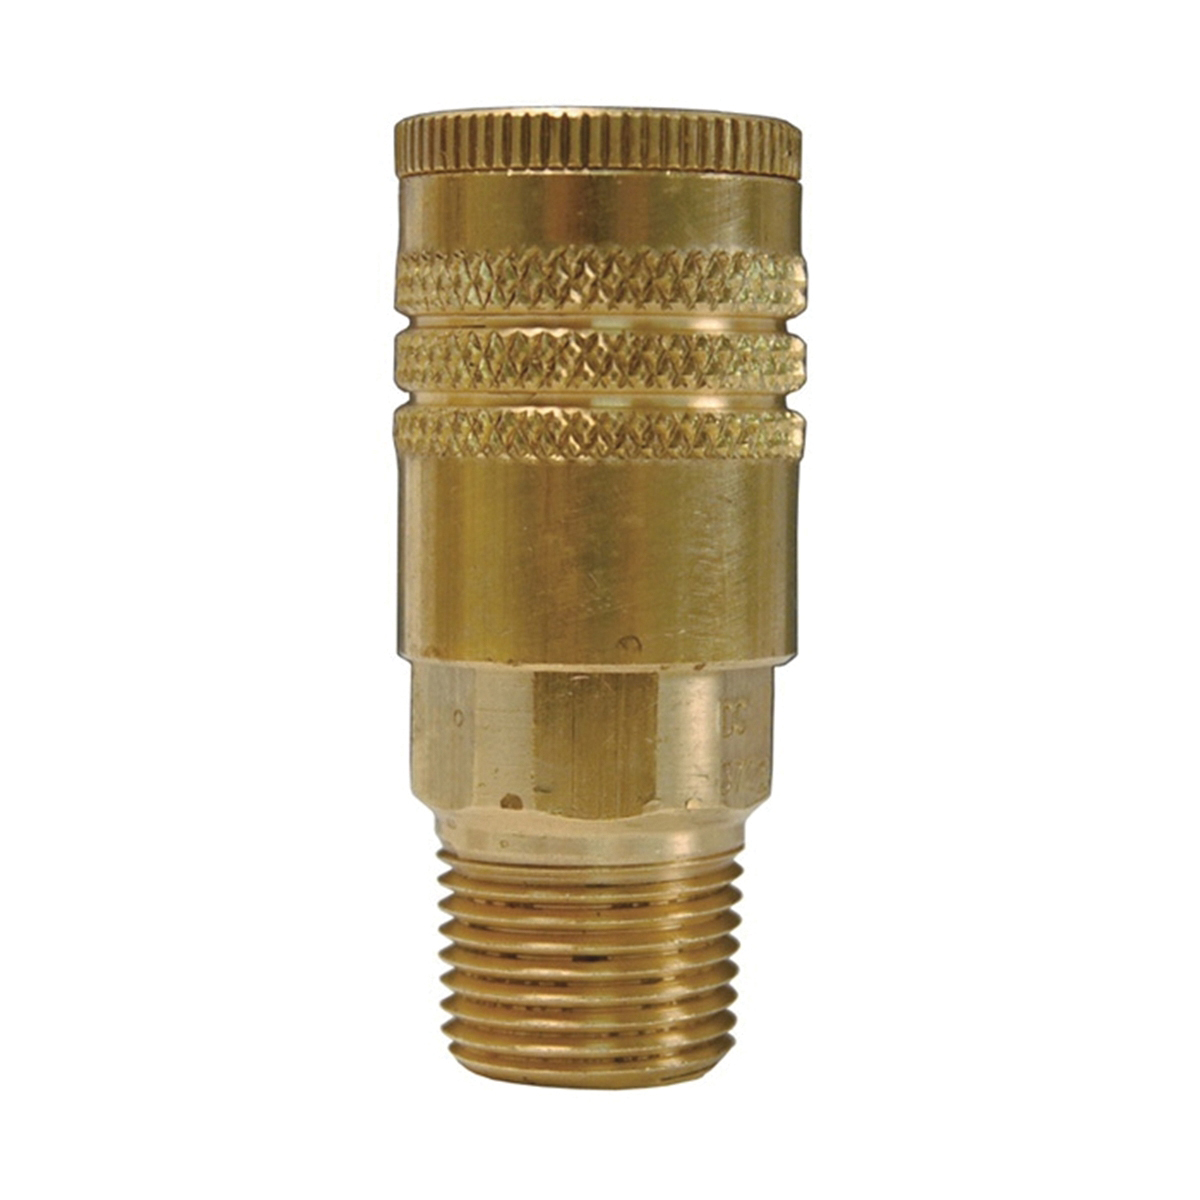 Pneumatic Manual Coupling, 1/4 in x 1/4-18 Fitting, Quick-Disconnect Coupler x MNPT Connection, 300 psi Pressure